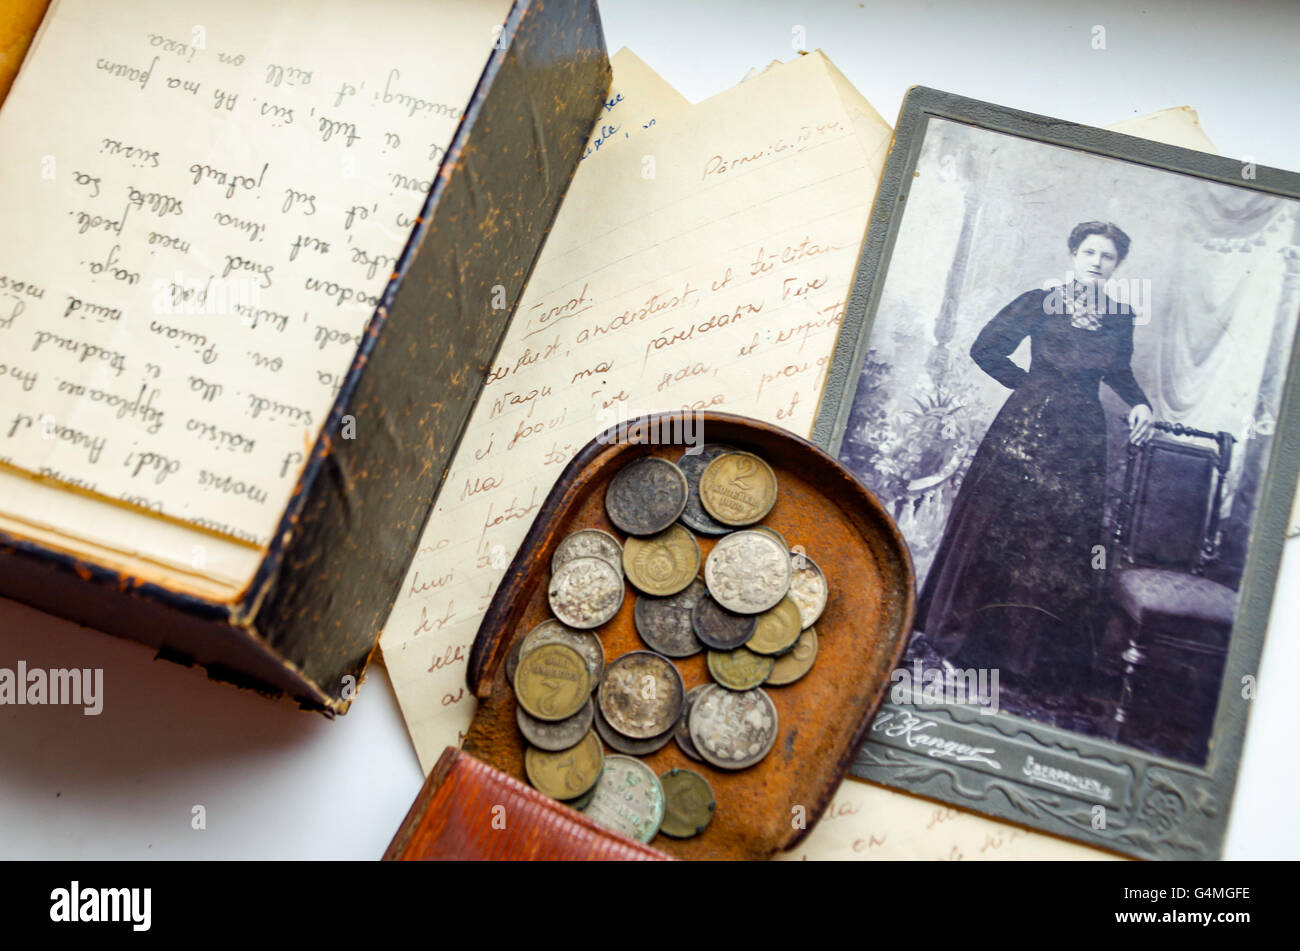 Leather coin pouch with coins from Russian Empire, handwritten love letters from 1930s and 1940s and a b&w photo of a lady Stock Photo